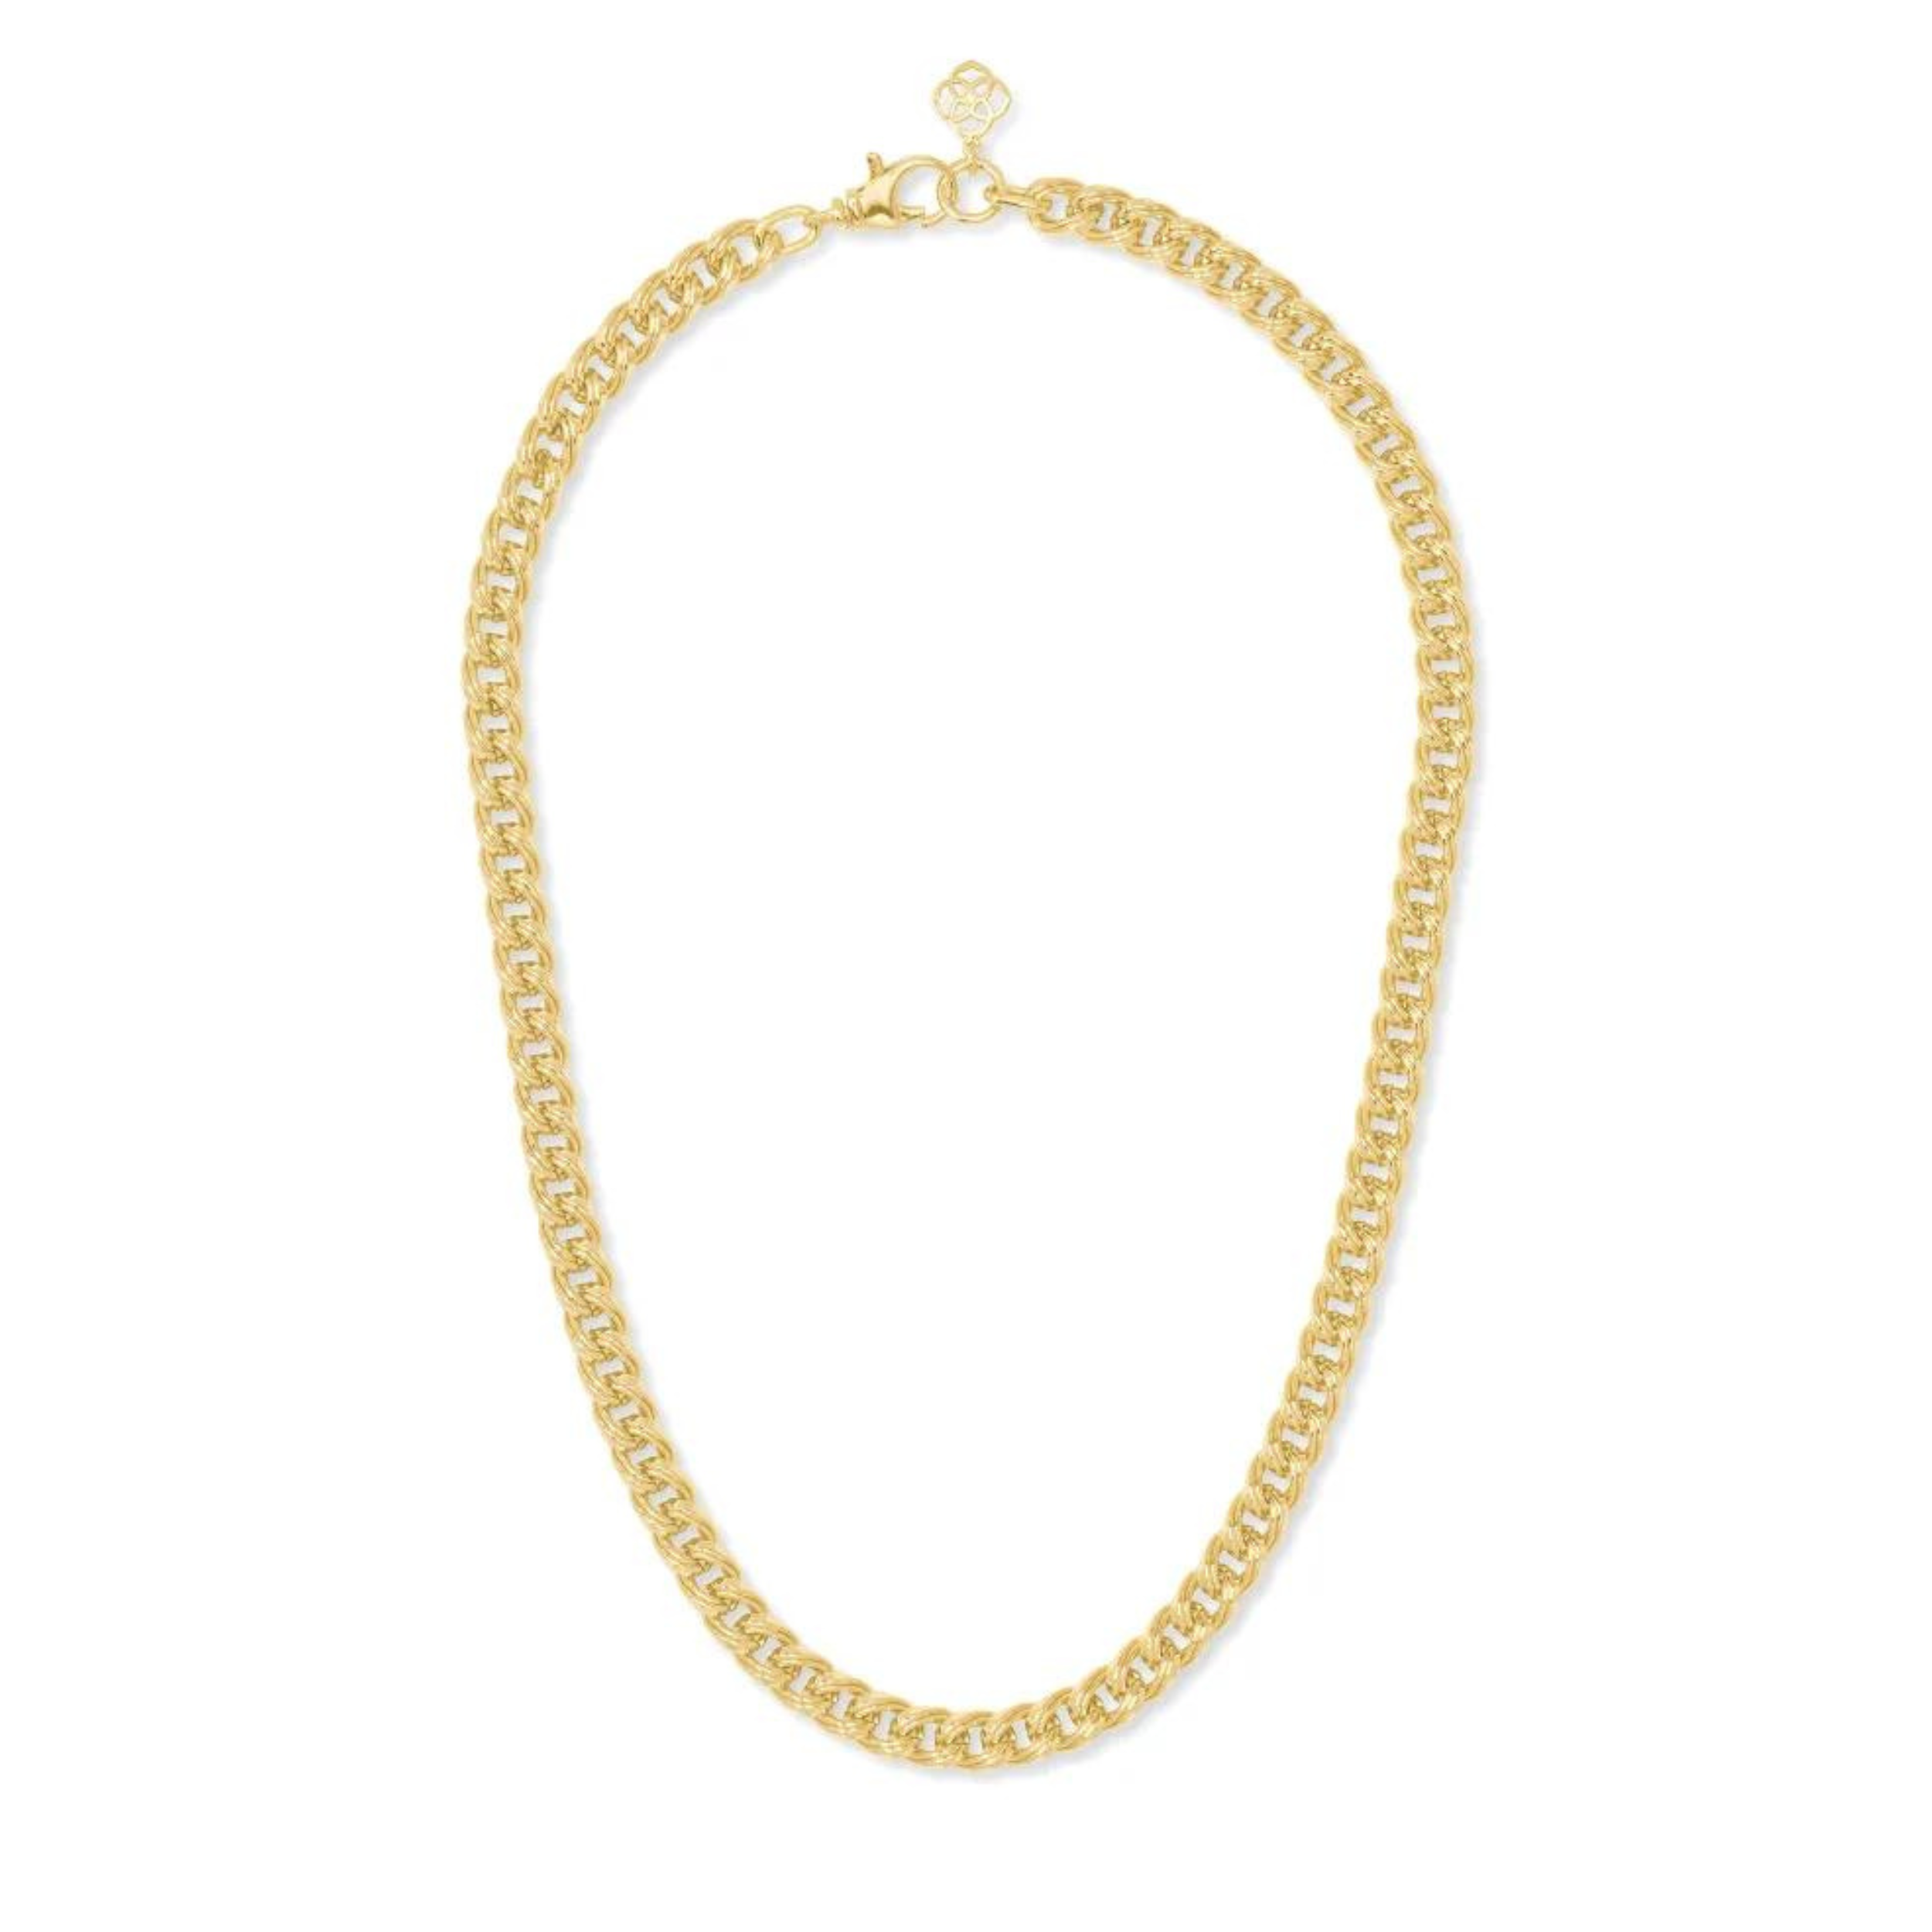 Kendra Scott | Vincent Chain Necklace in Gold - Giddy Up Glamour Boutique